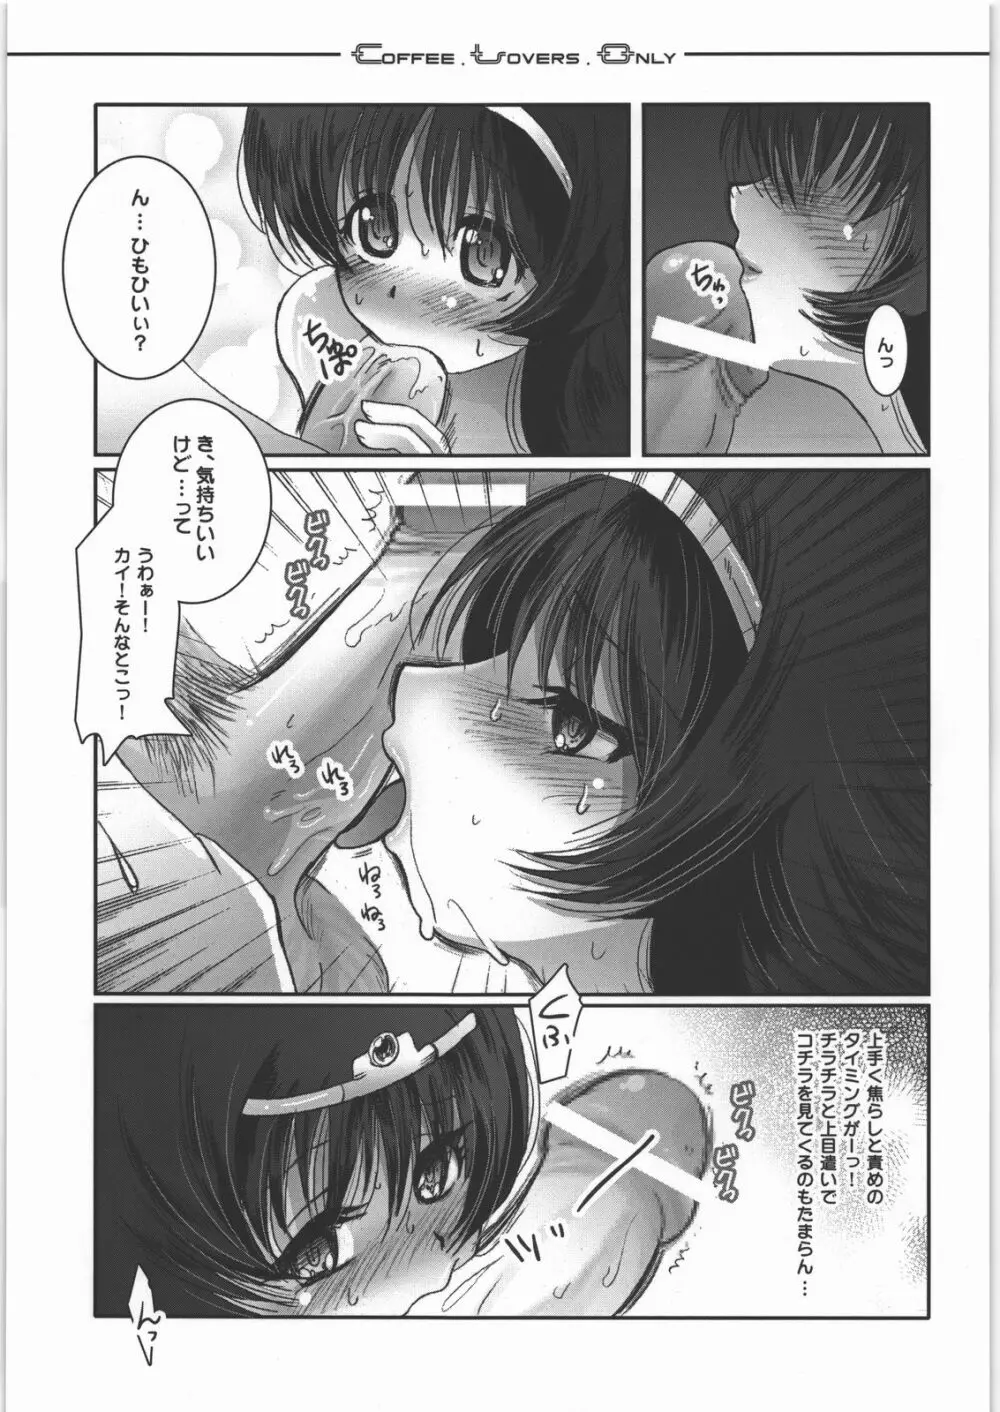 C.L.O - coffee lovers only - page22